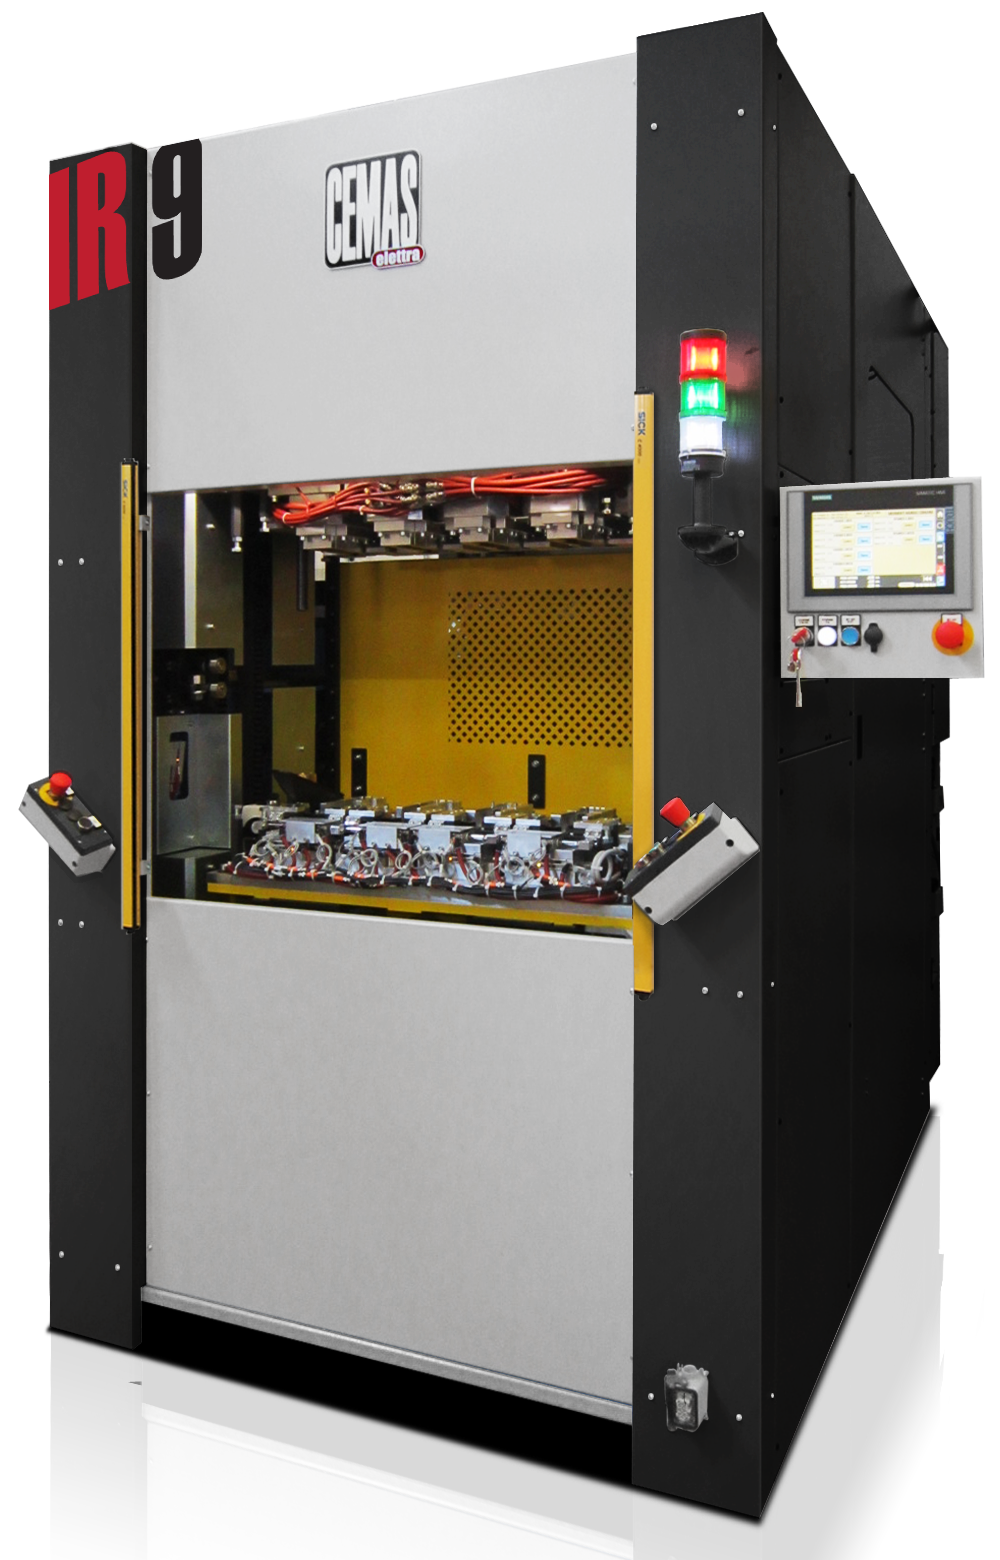 Suppliers of High Performance Hotplate Welding Machines